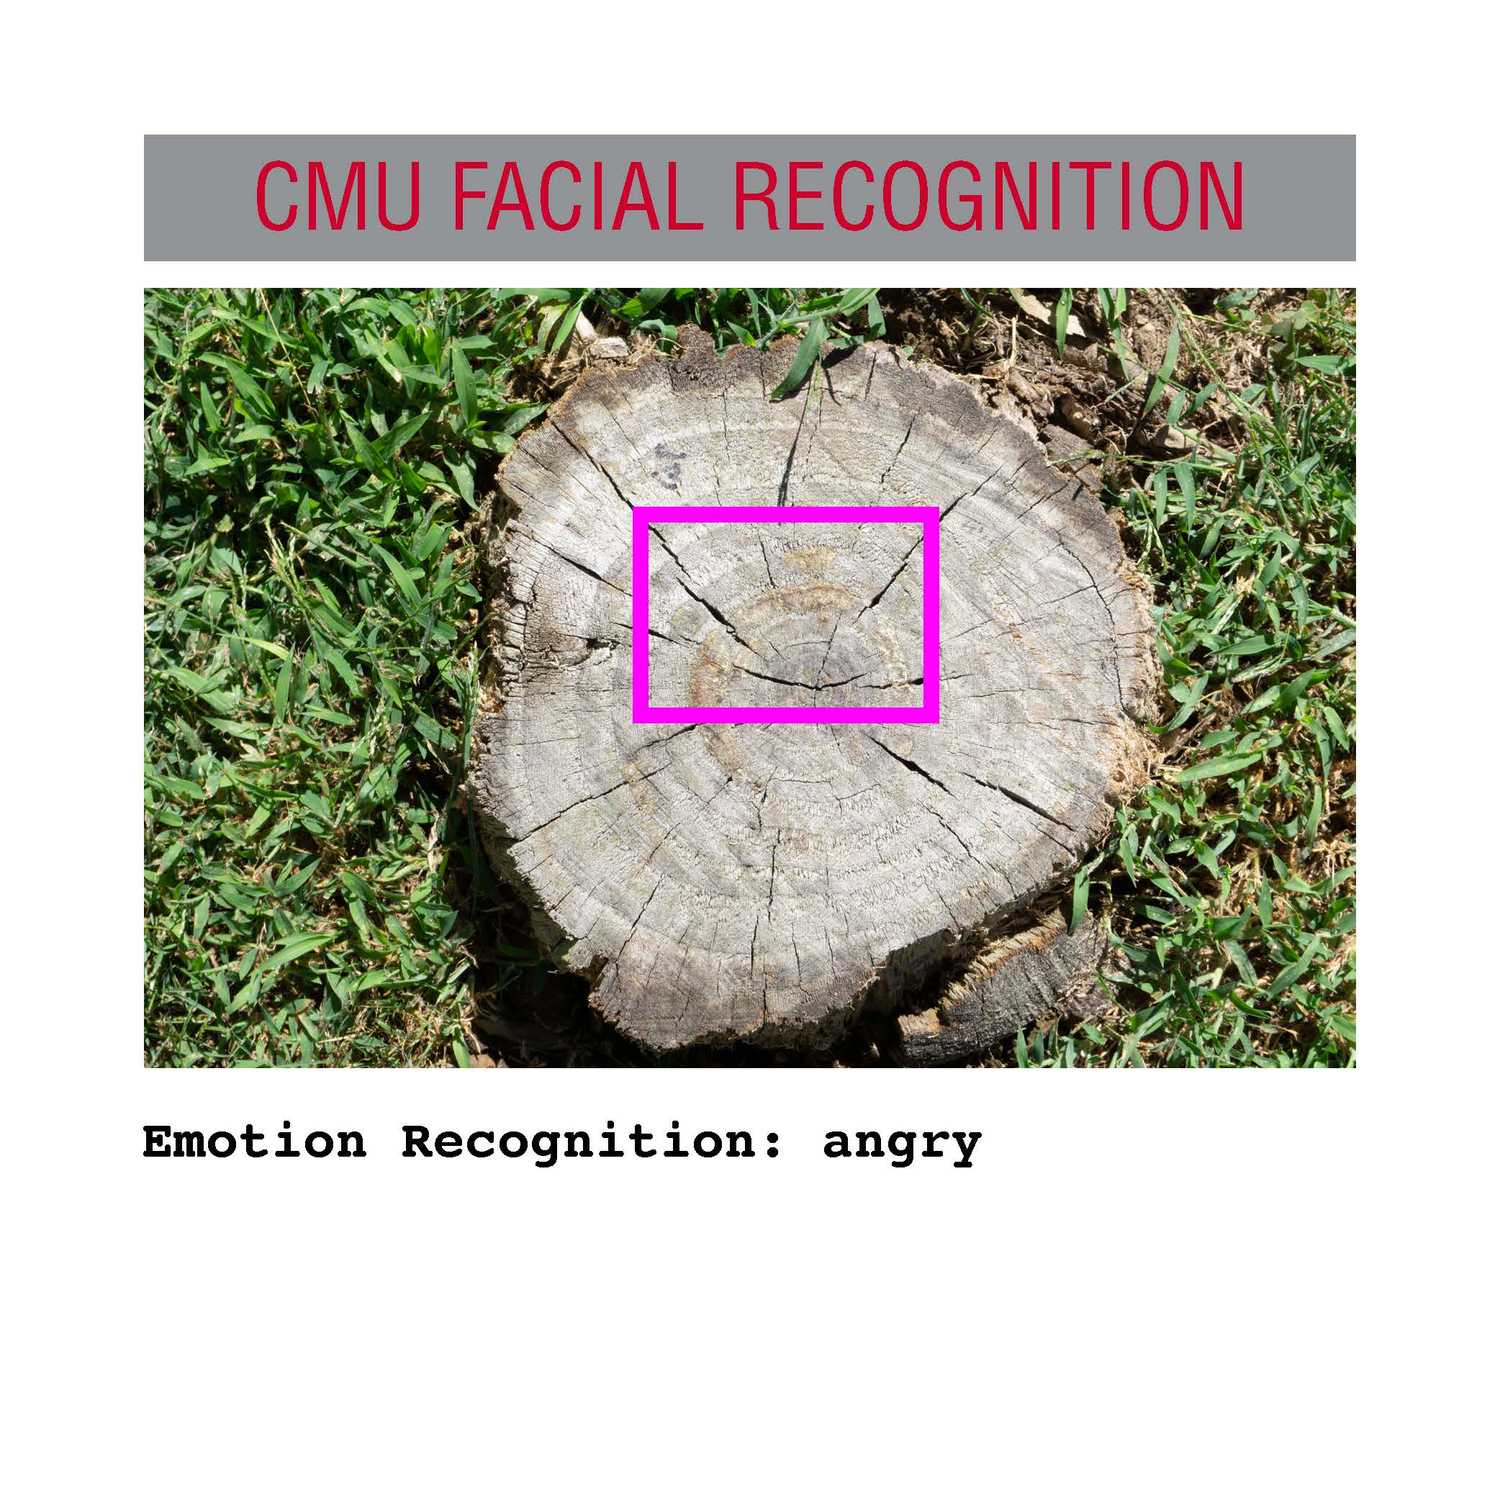 facial recognition Page 06